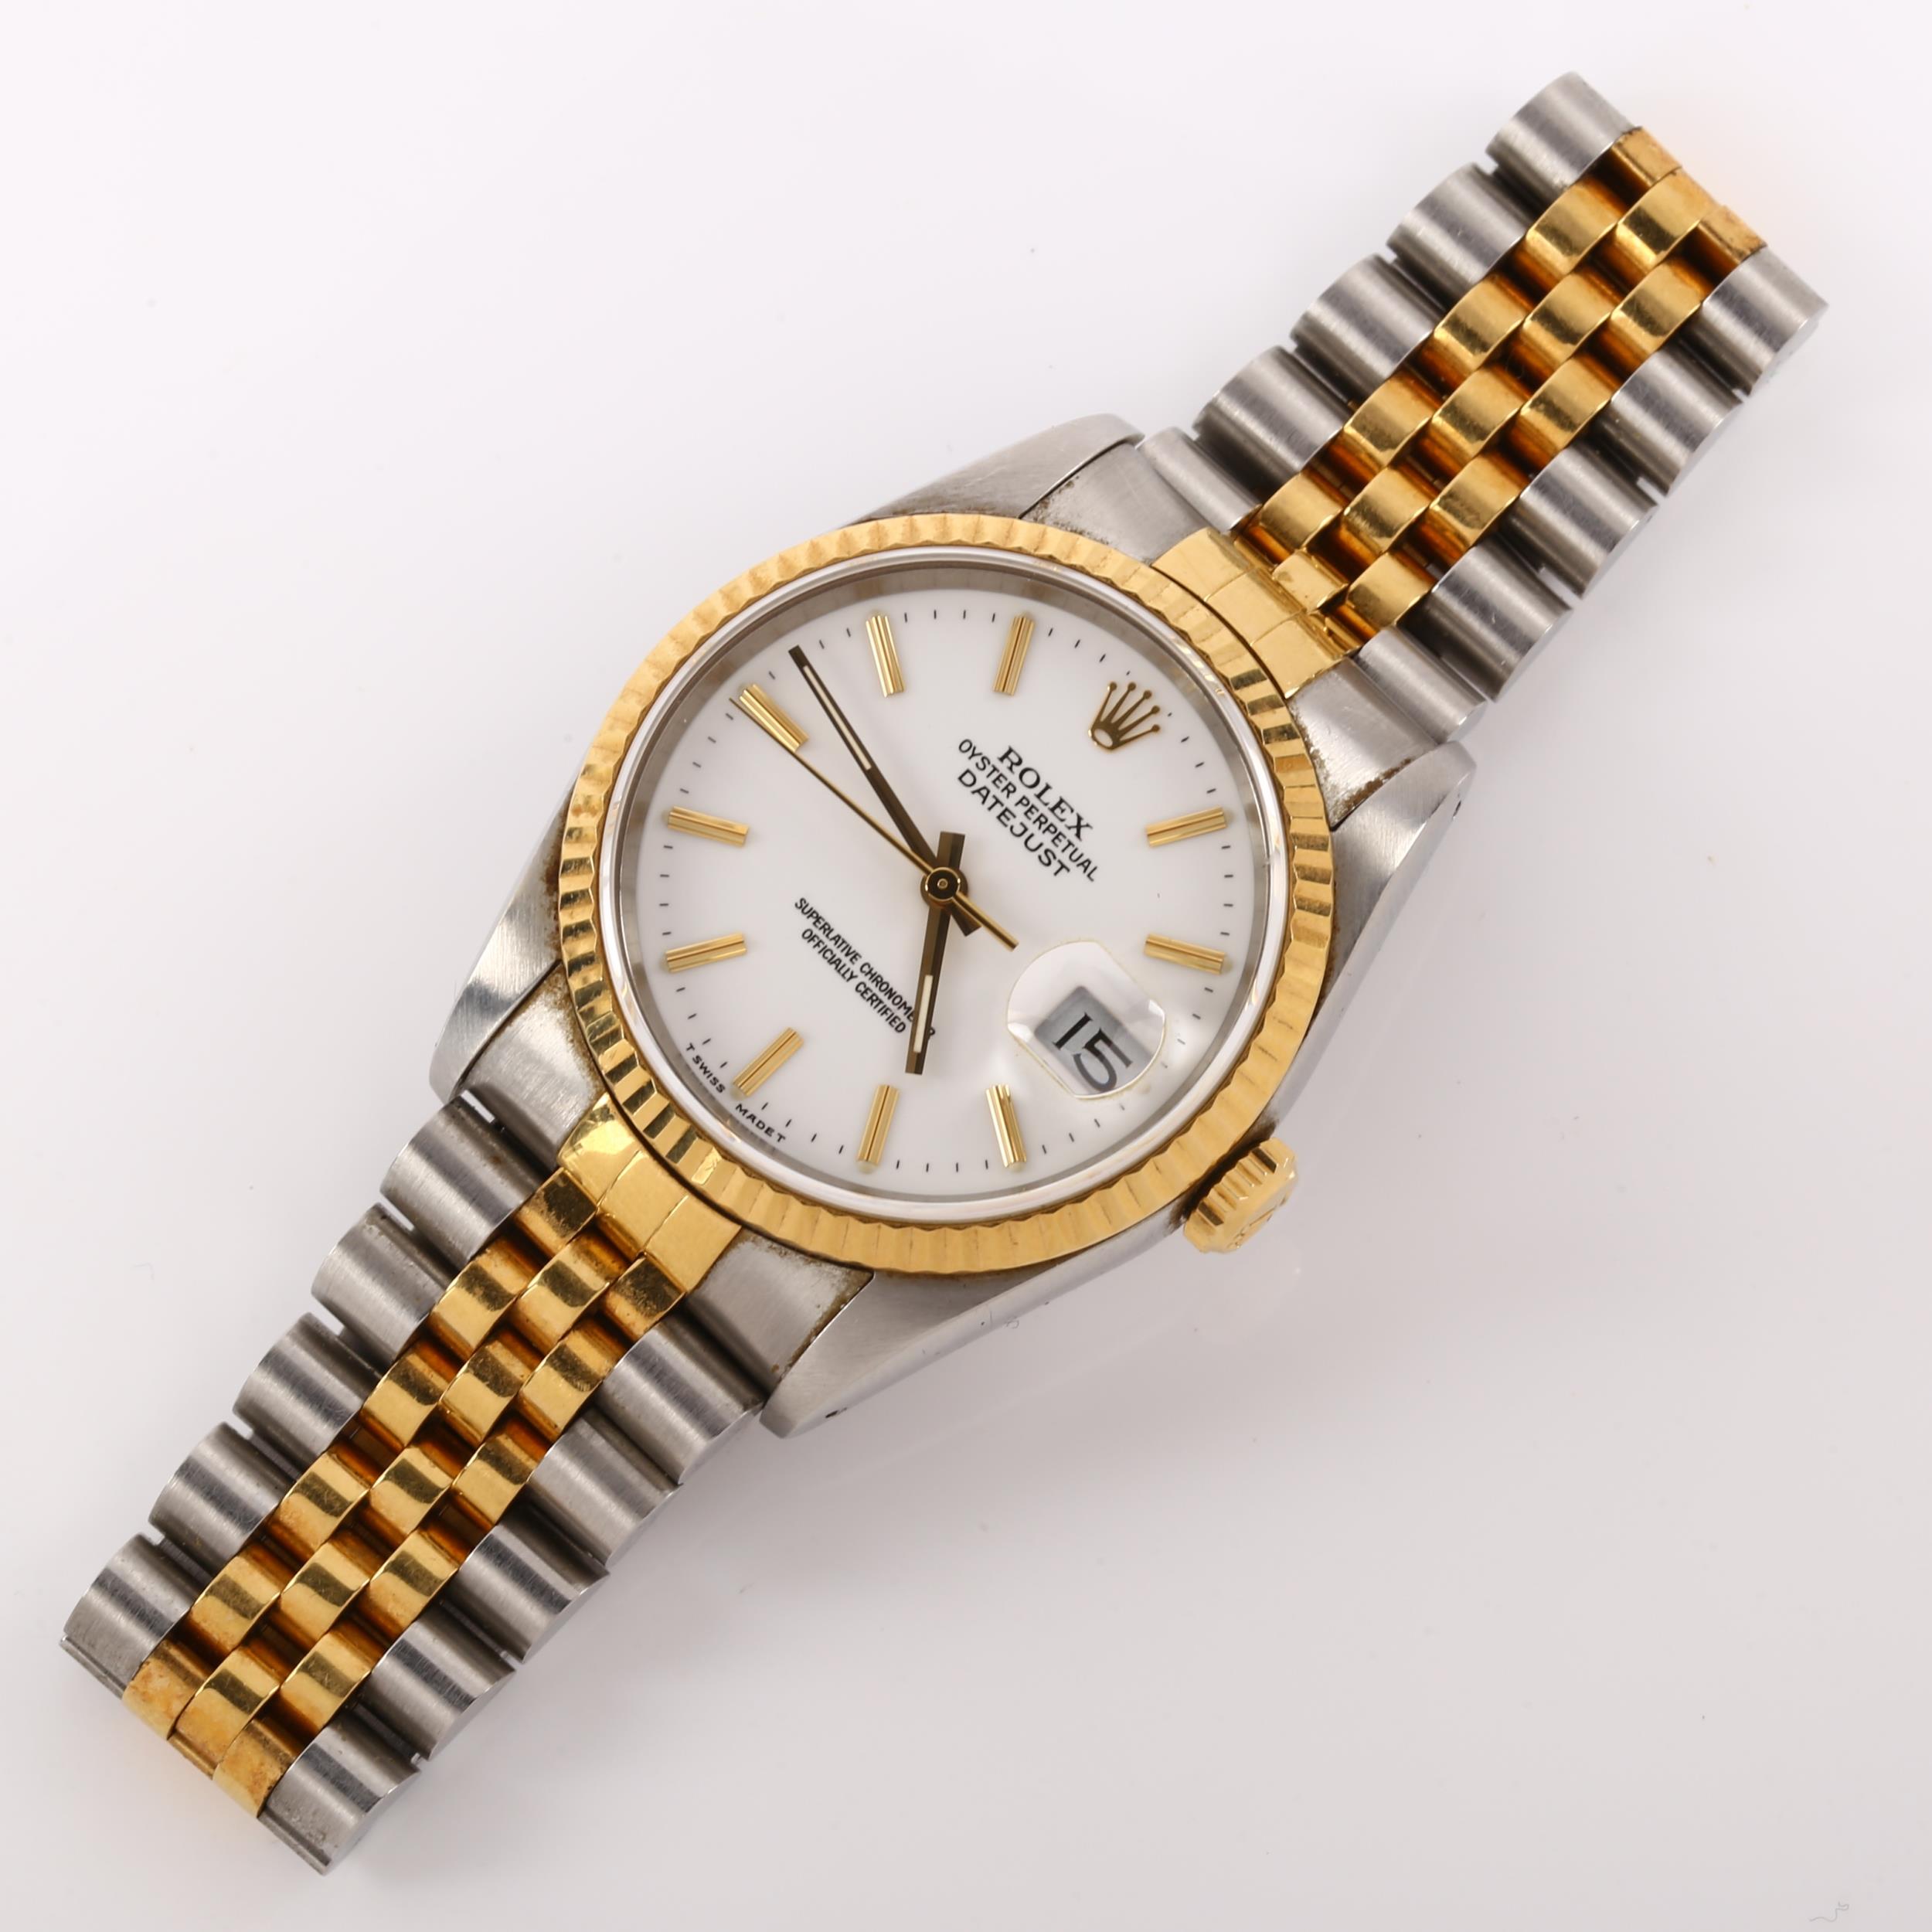 ROLEX - a bi-metal Oyster Perpetual Datejust automatic bracelet watch, ref. 16233, circa 1989, white - Image 2 of 6